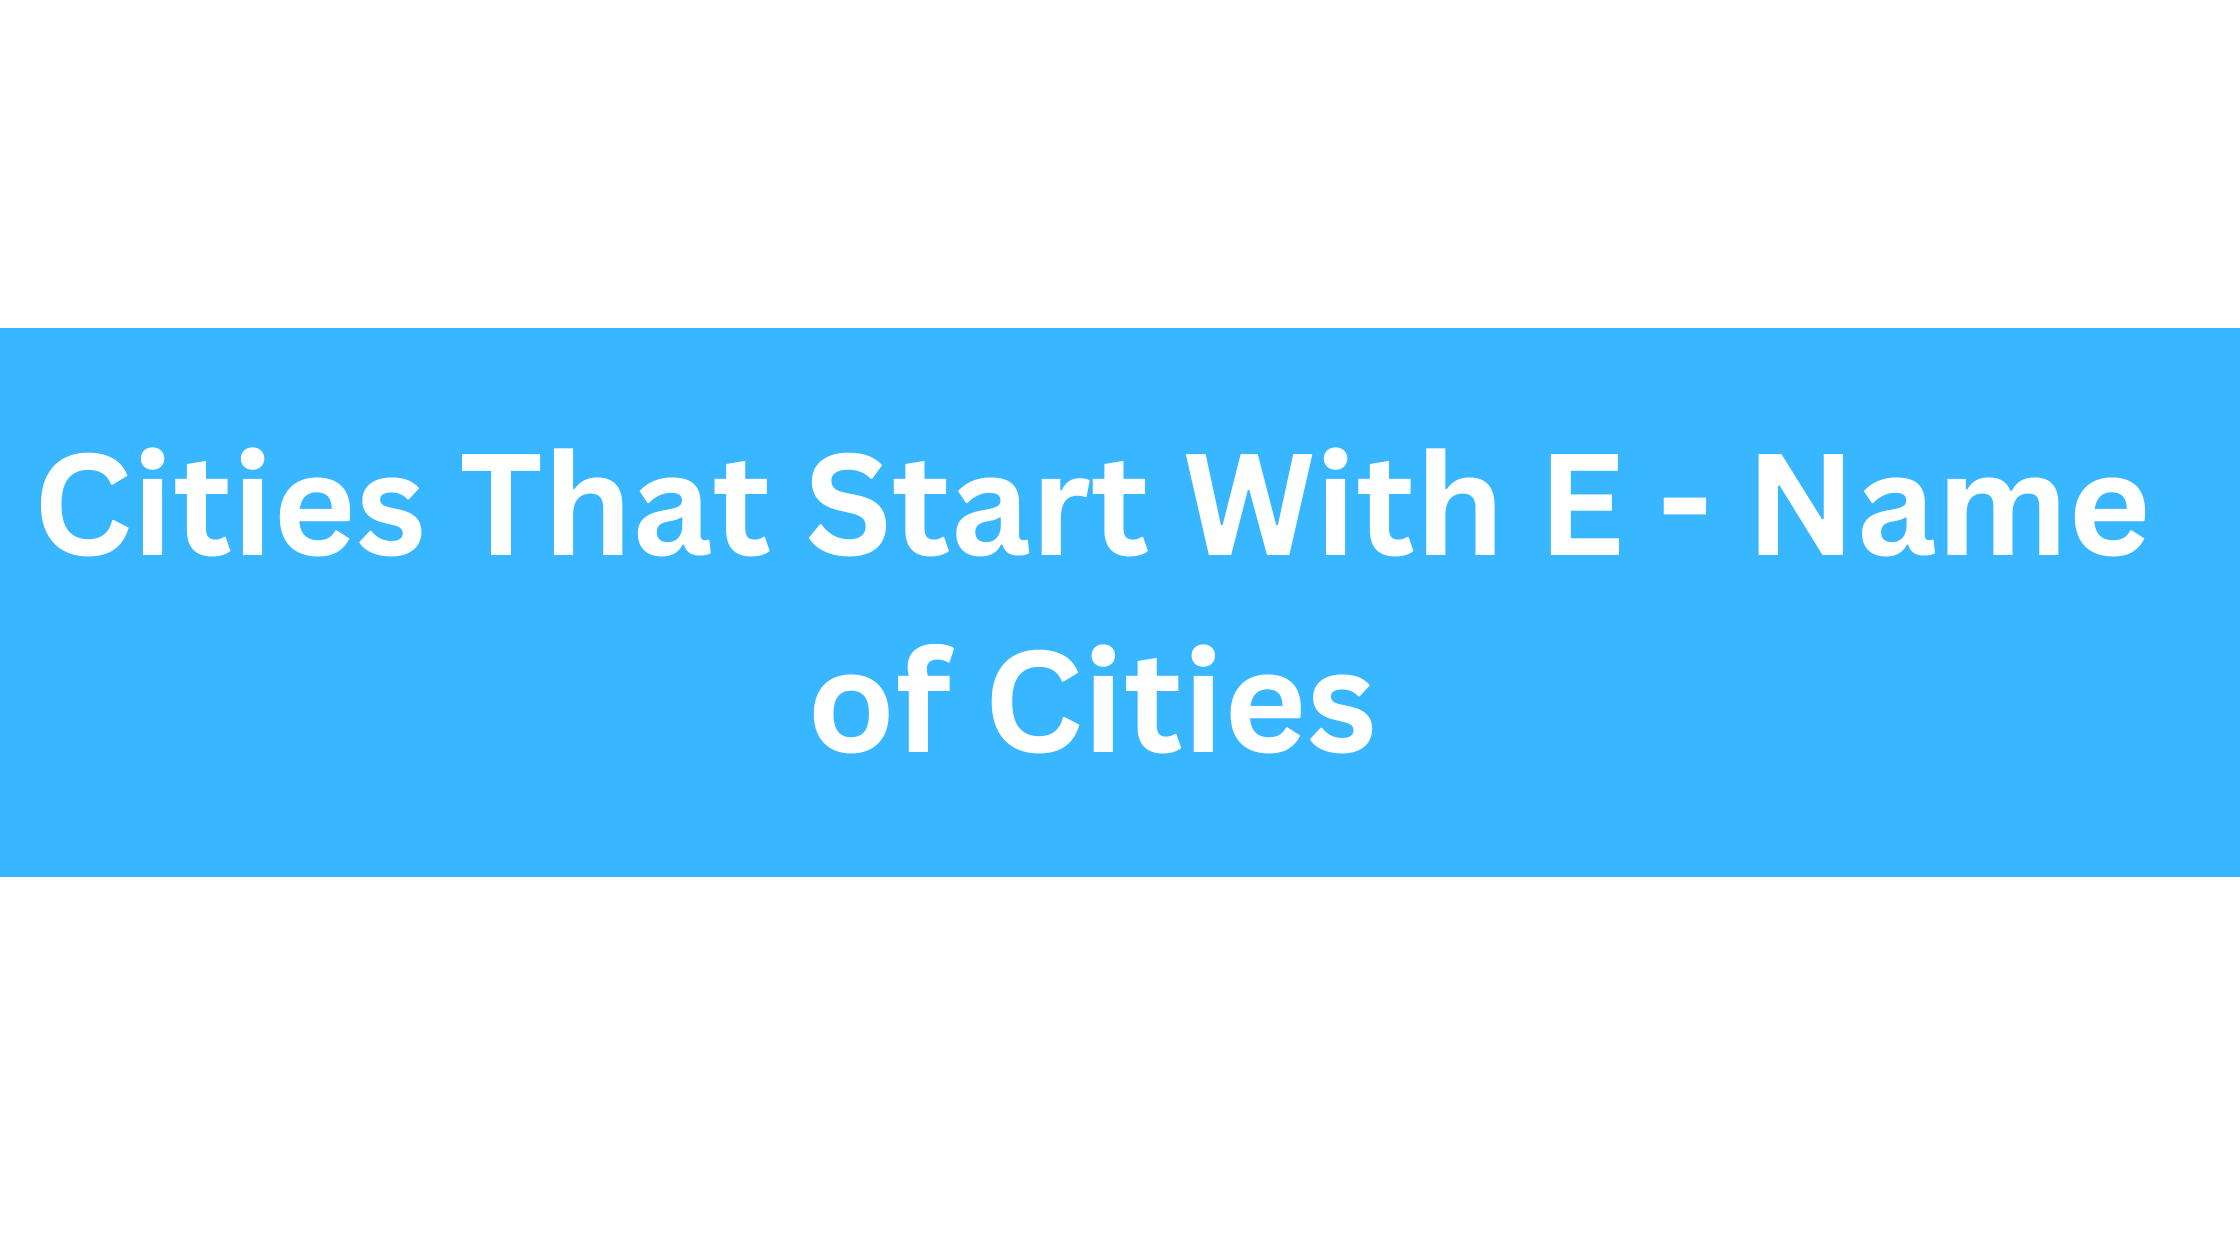 Cities That Start With E